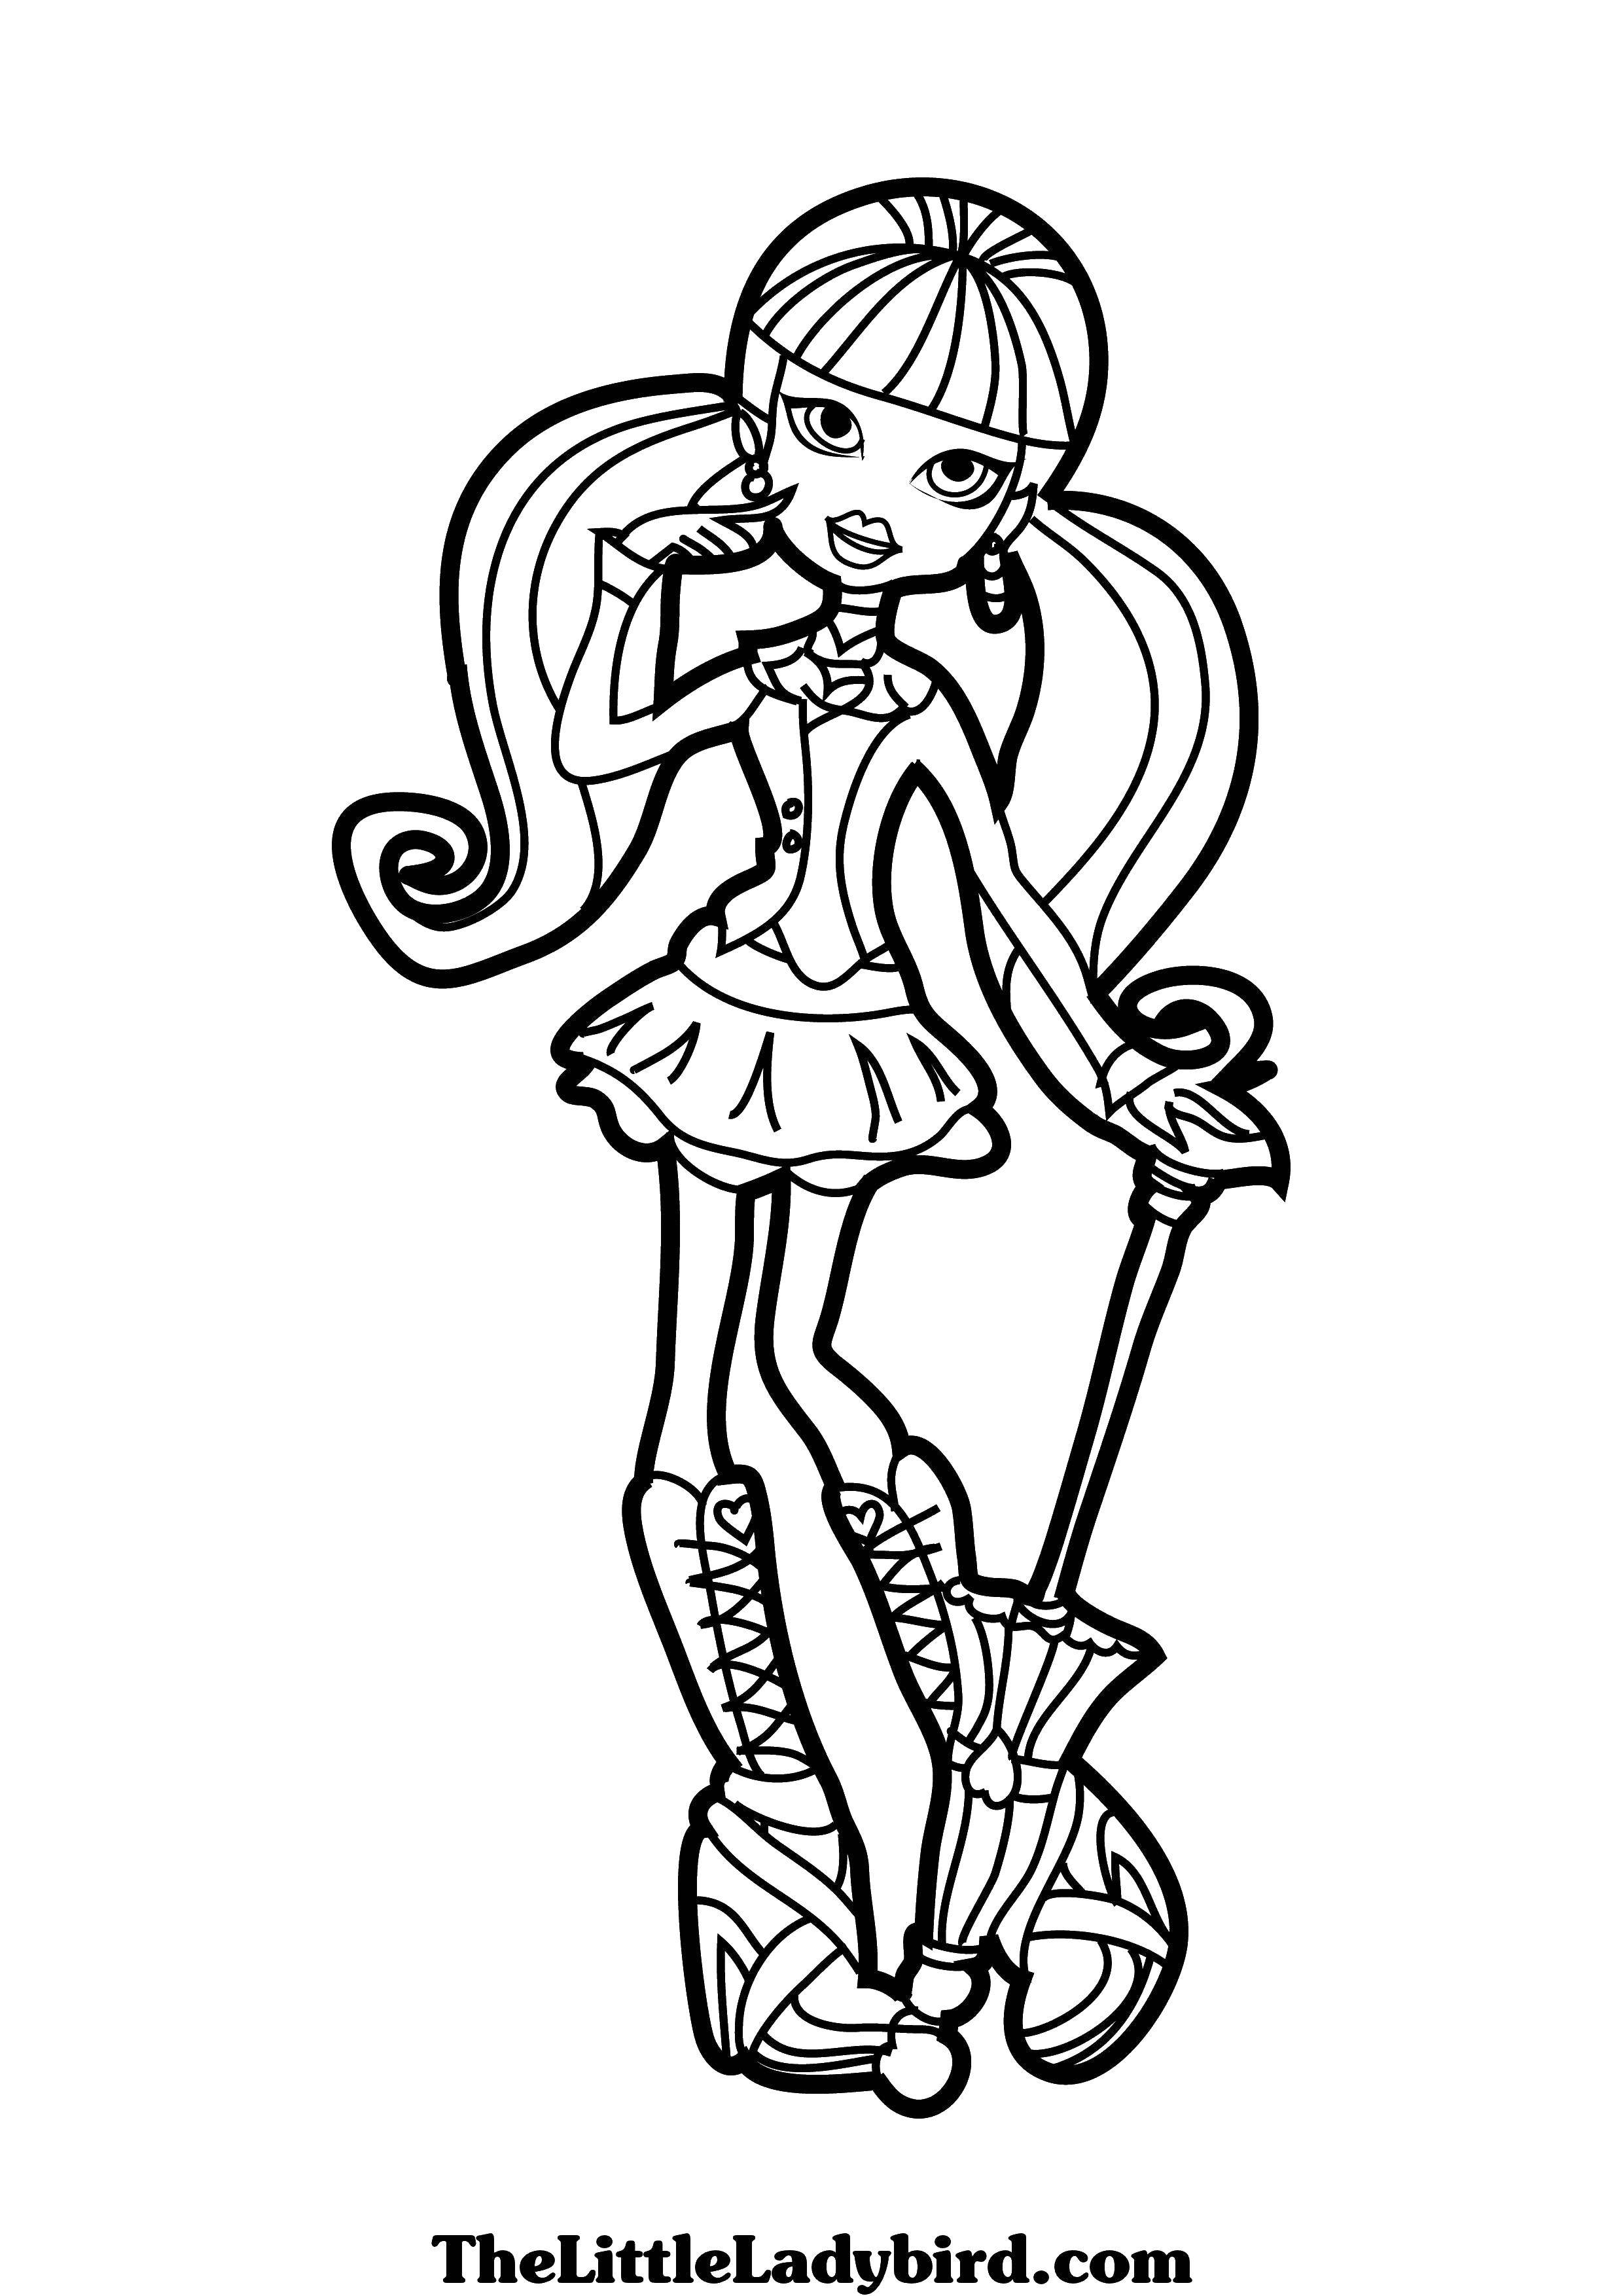 Coloring Little lady bird. Category coloring pages for girls. Tags:  lady , bird.